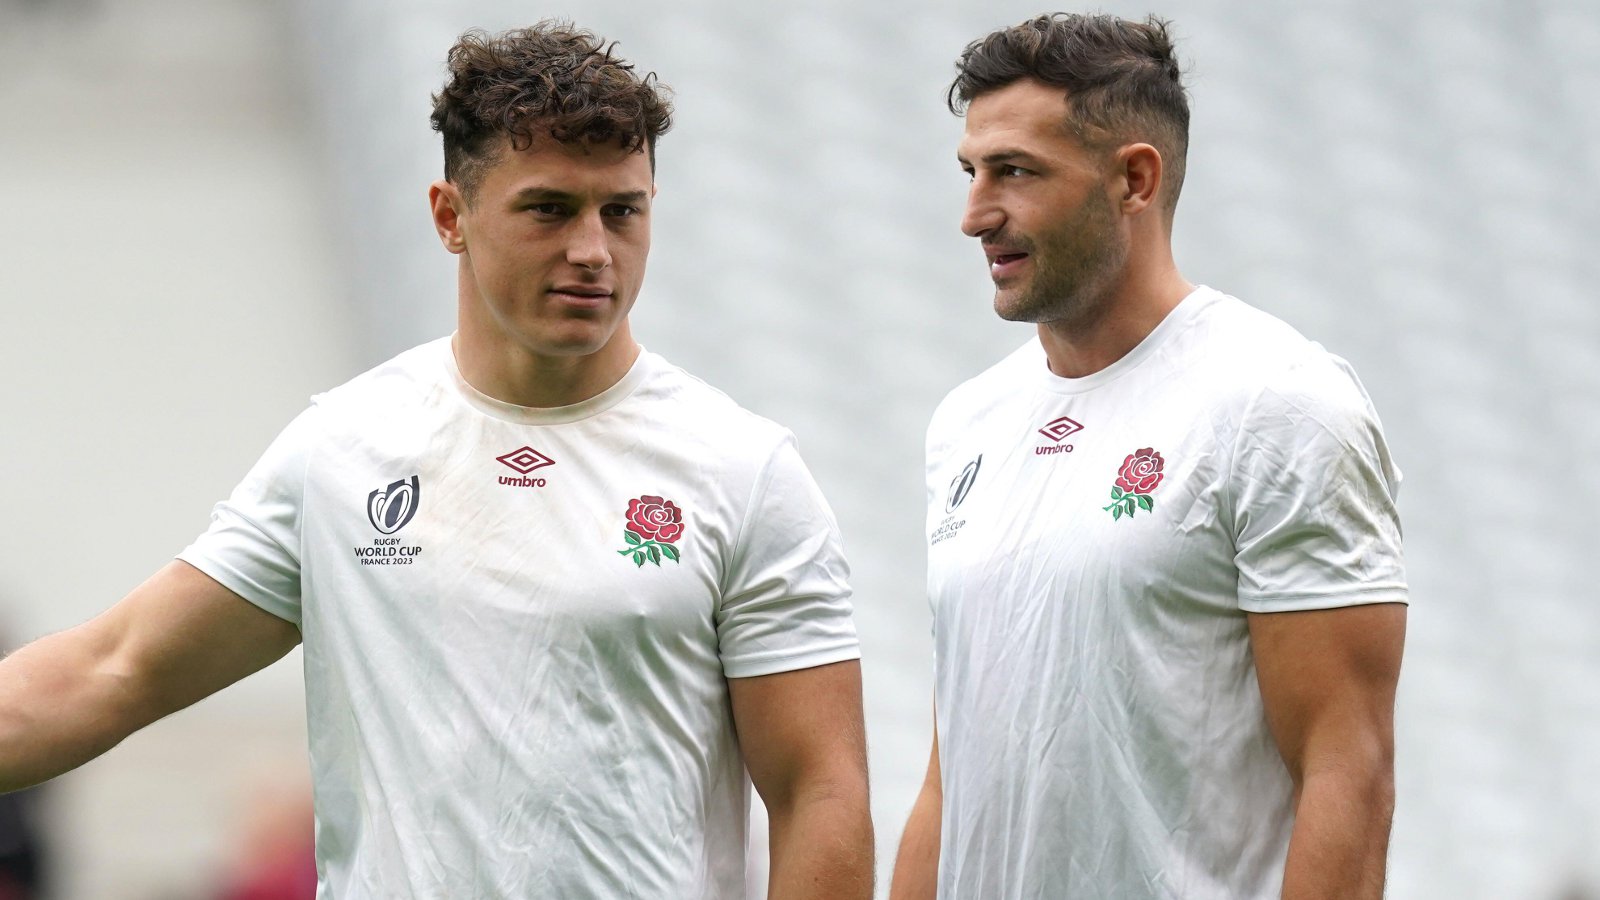 jonny may takes aim at rfu ‘mess’ over hybrid contracts amidst sluggish negotiations